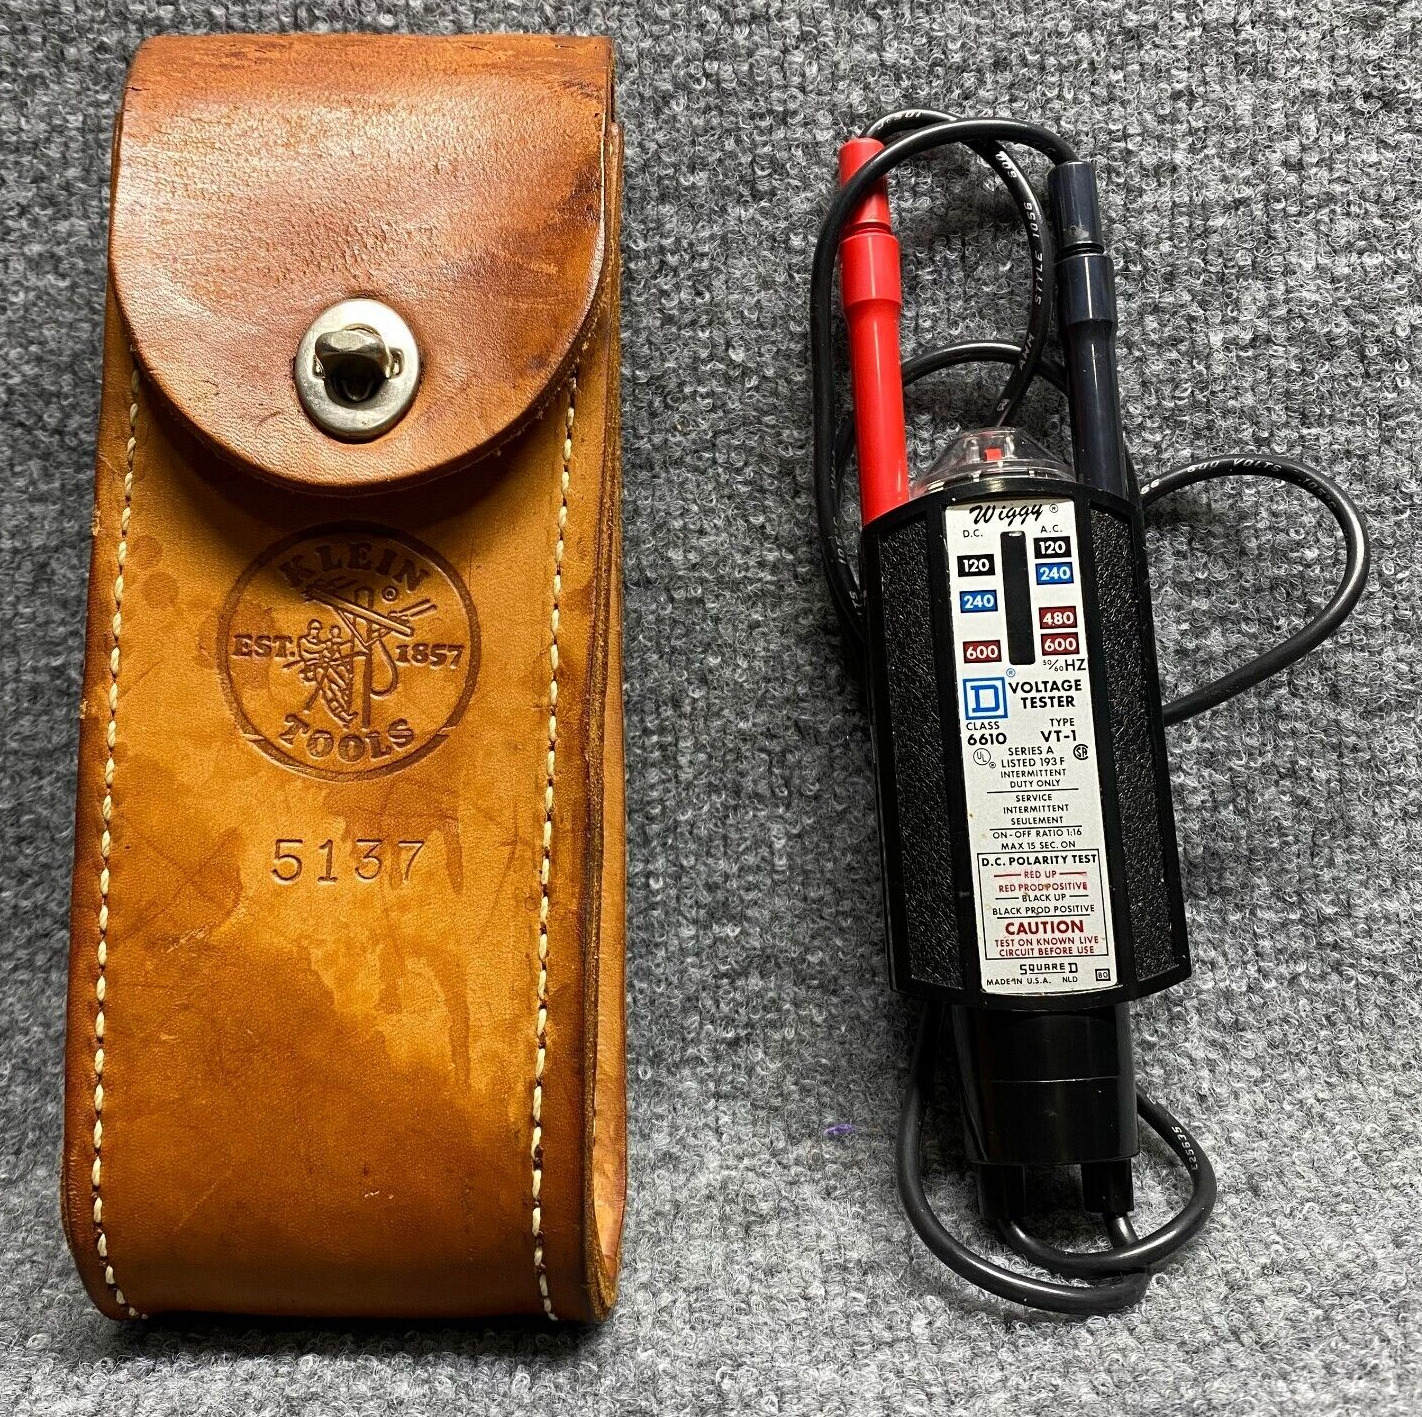 WIGGY Voltage Tester Square D 6610 Type VT-1 & Klien Leather Case Tested USA